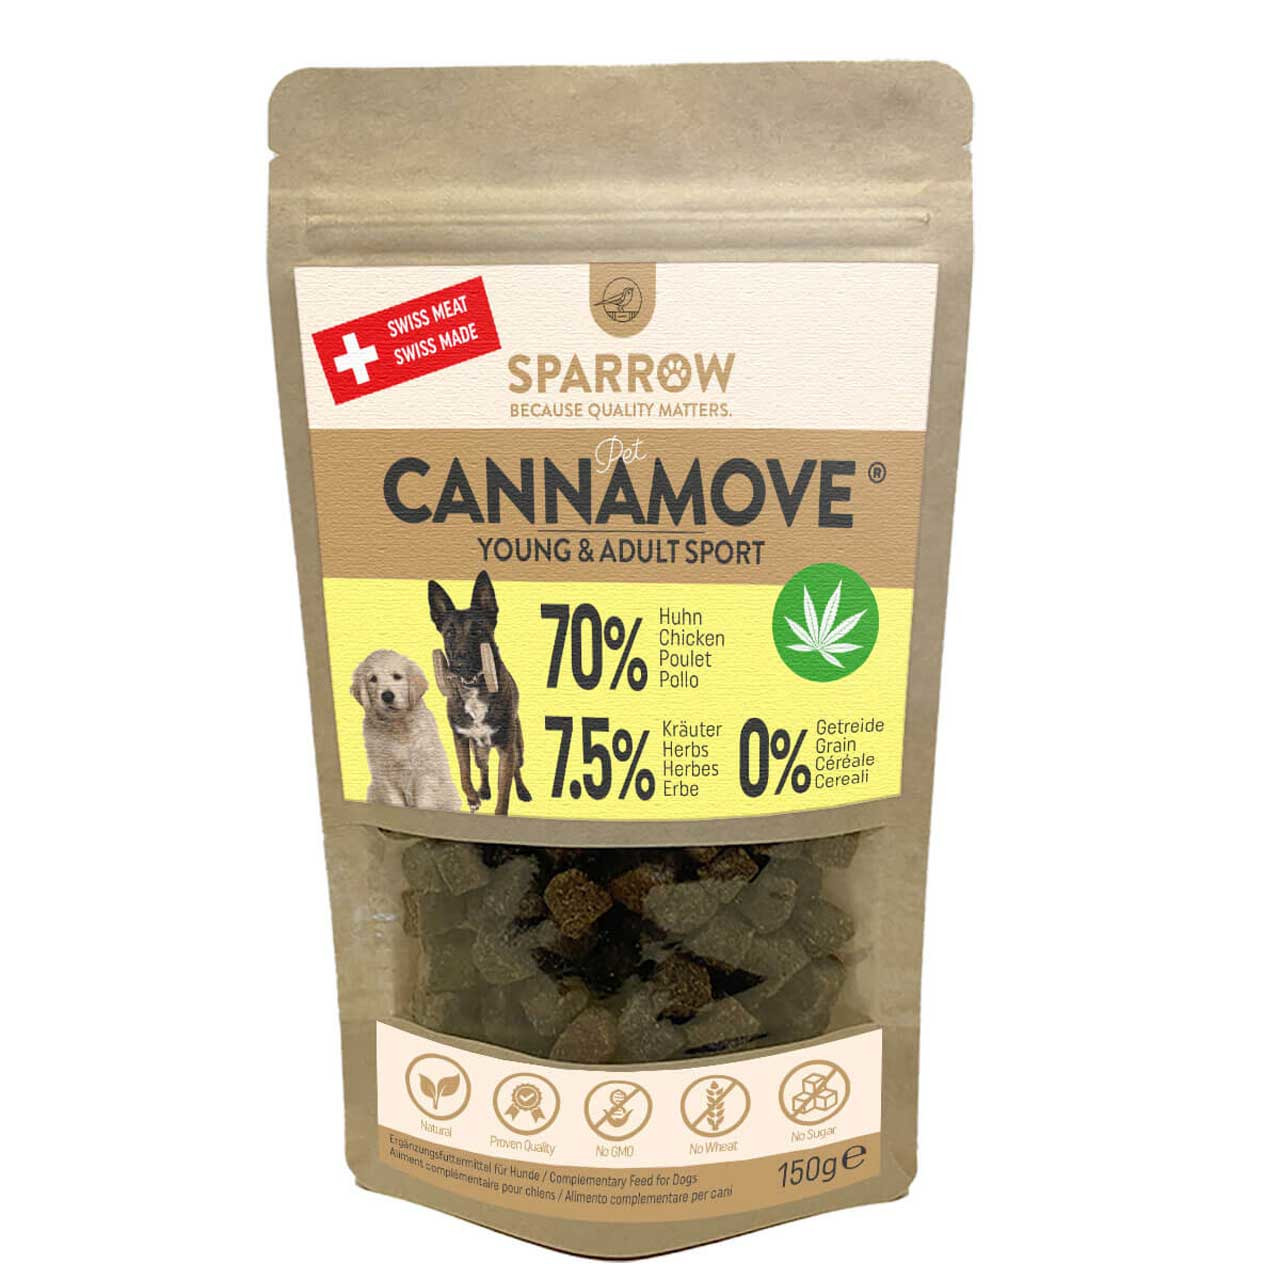 Sparpaket 2 x 200 g Sparrow CannaMove Young & Adult Sport 70% Chicken with Hemp Hunde Snack